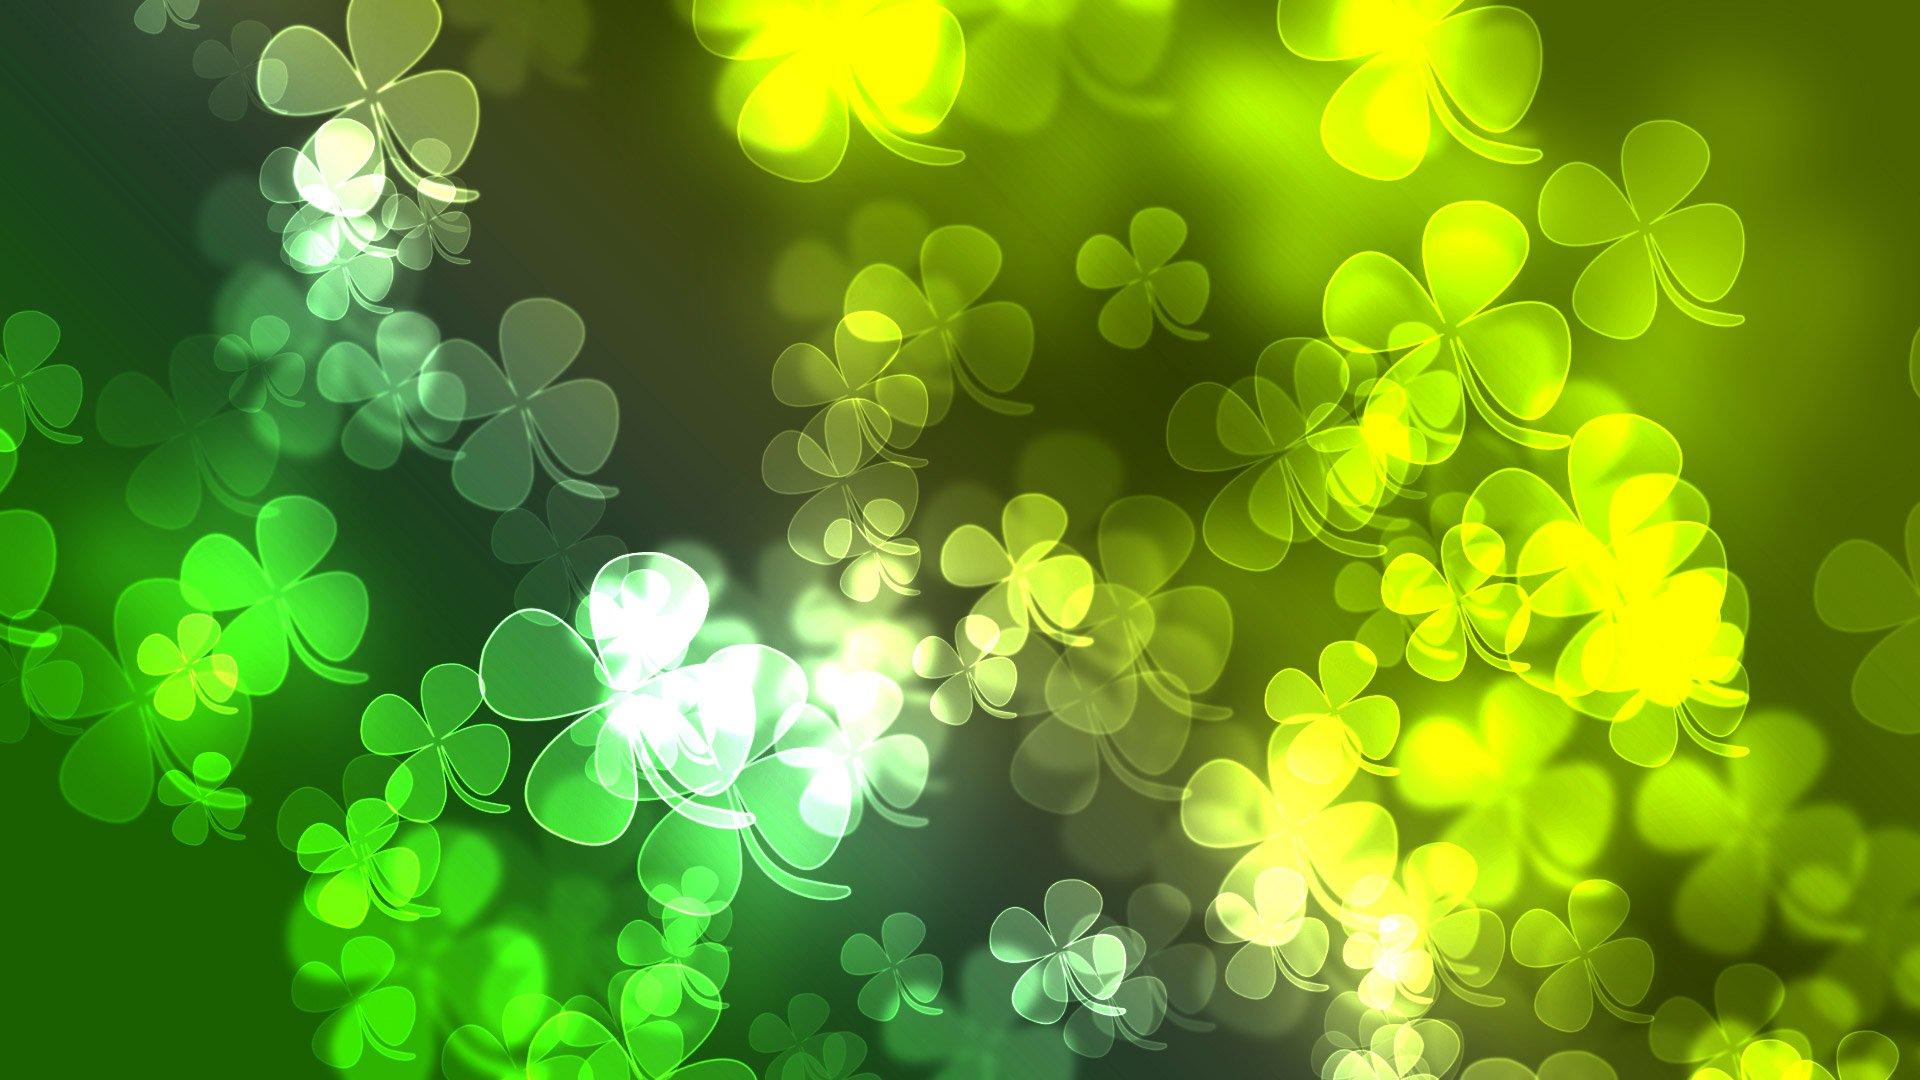 St. Patrick's Day 2020 Wallpapers - Wallpaper Cave